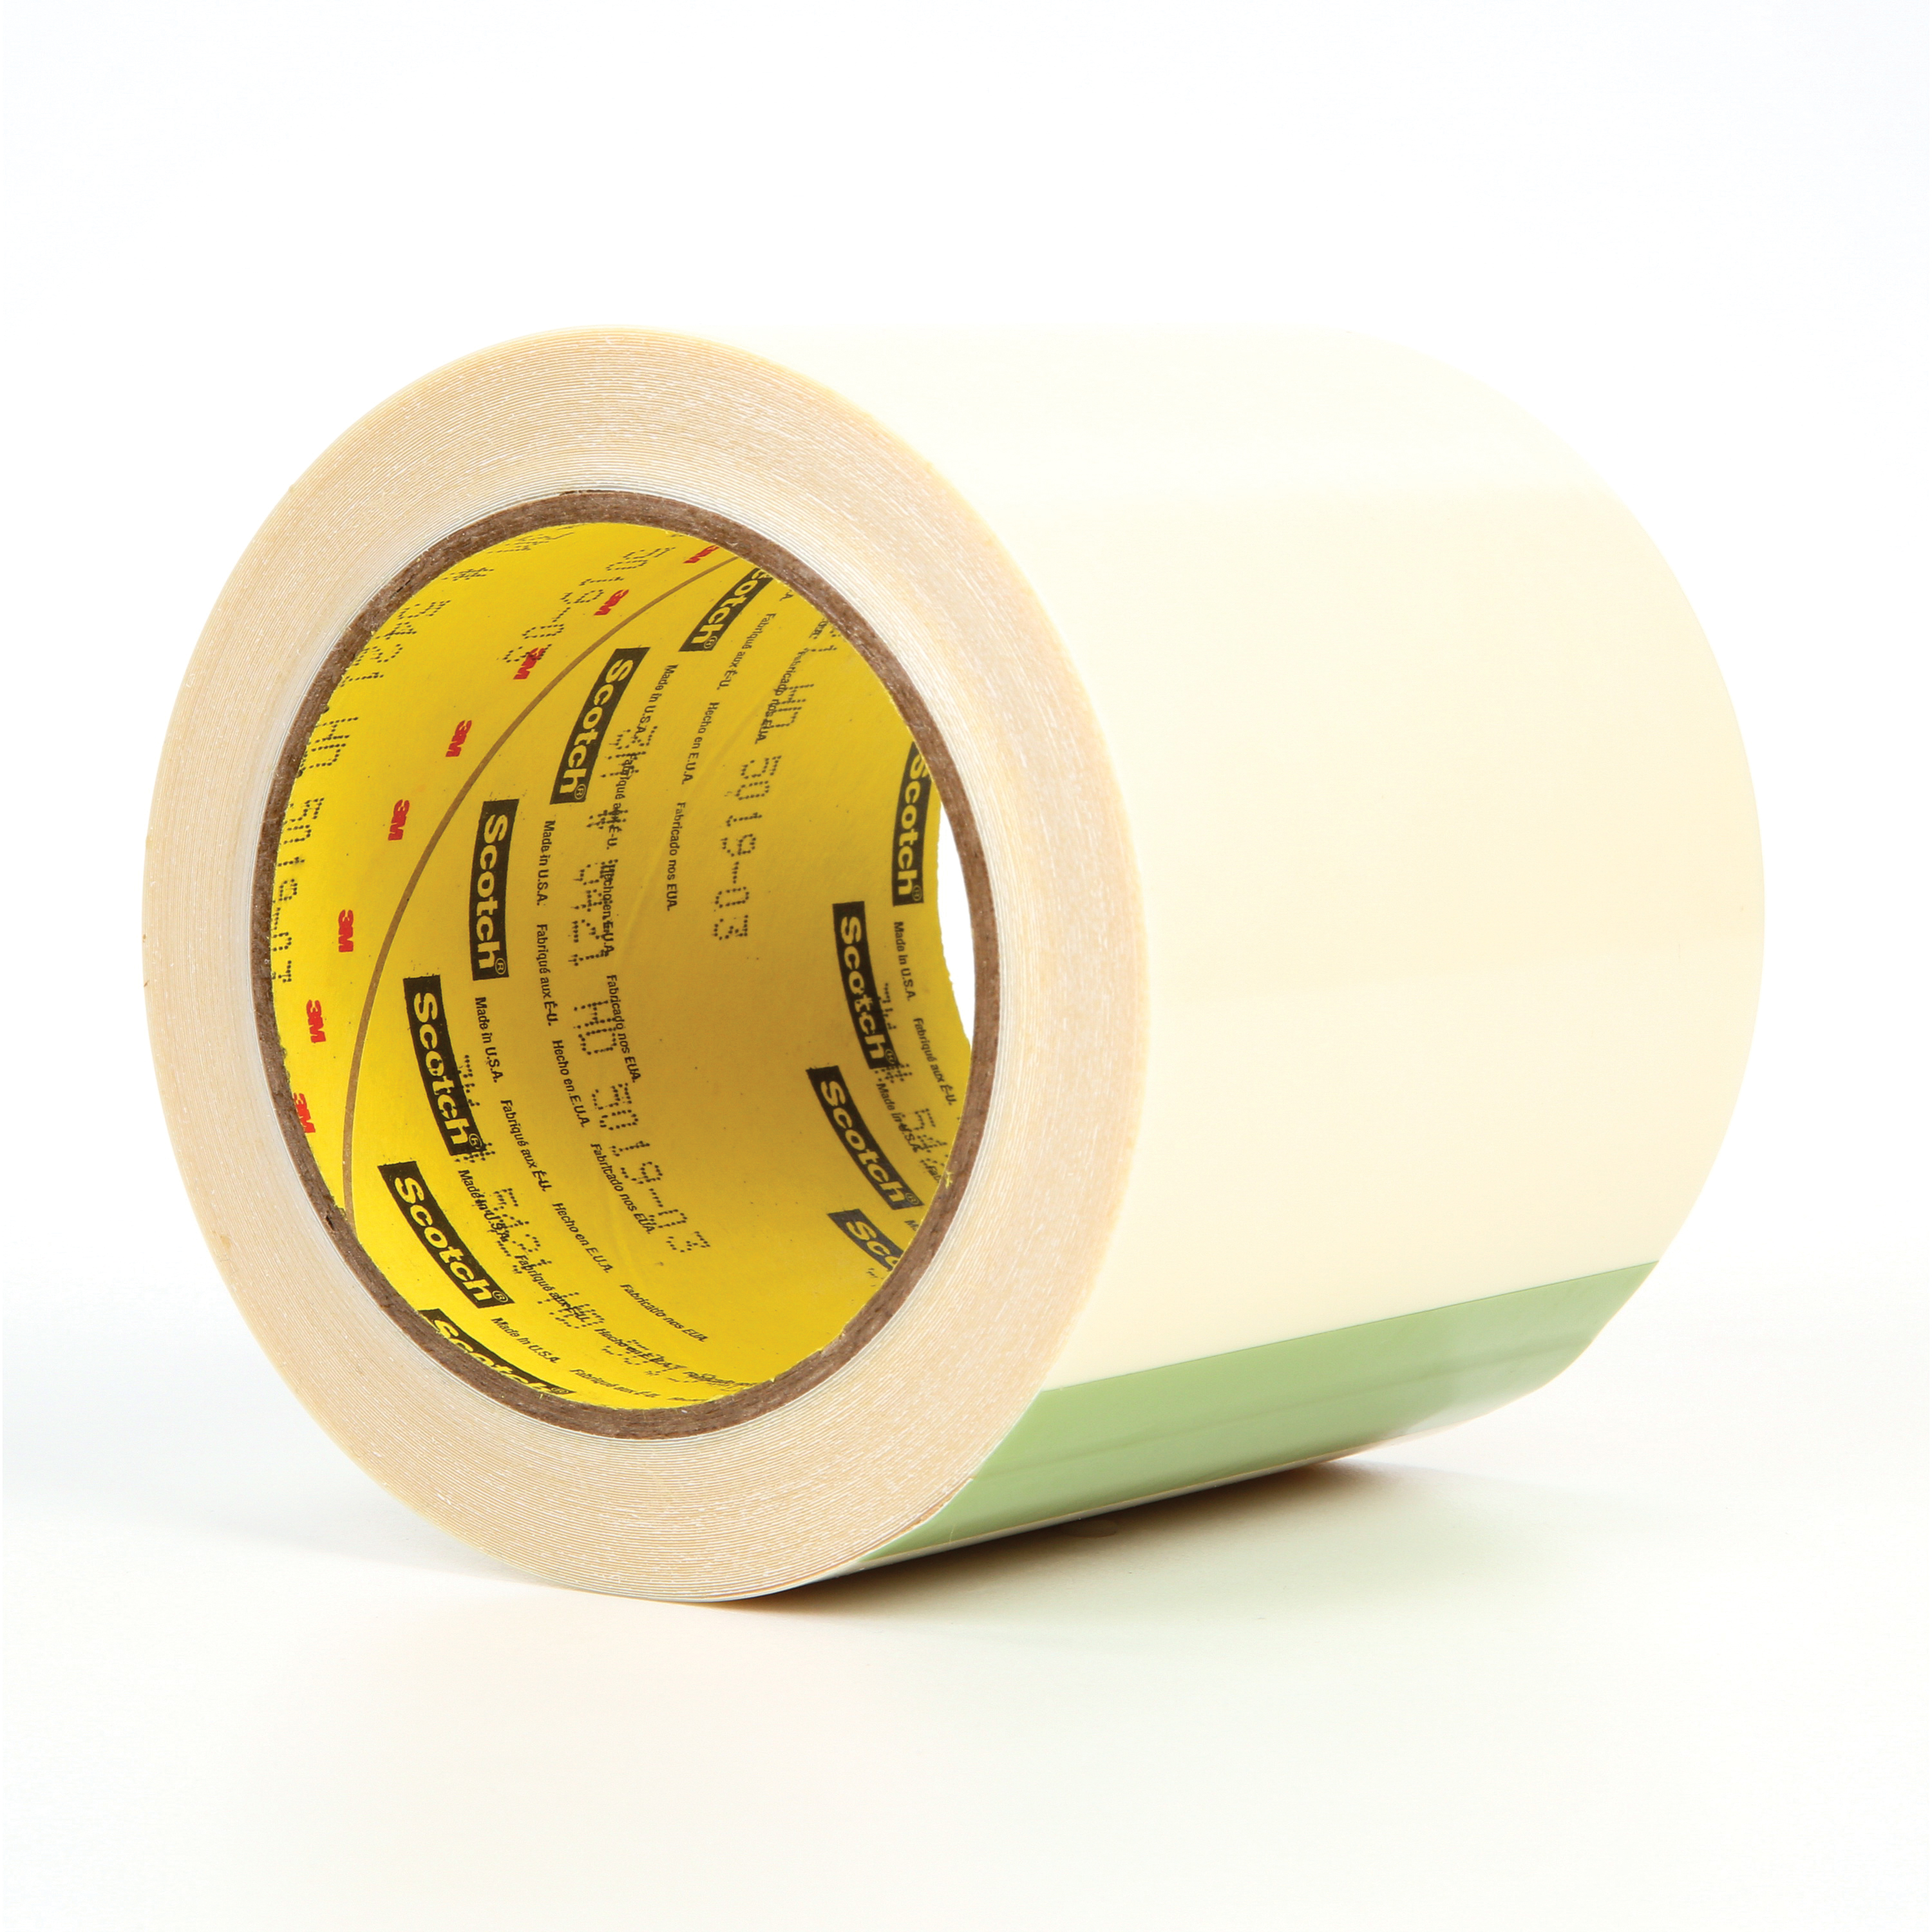 3M™ 021200-14455 General Purpose Film Tape, 18 yd L x 4 in W, 6.7 mil THK, Rubber Adhesive, UHMWP Backing, Transparent